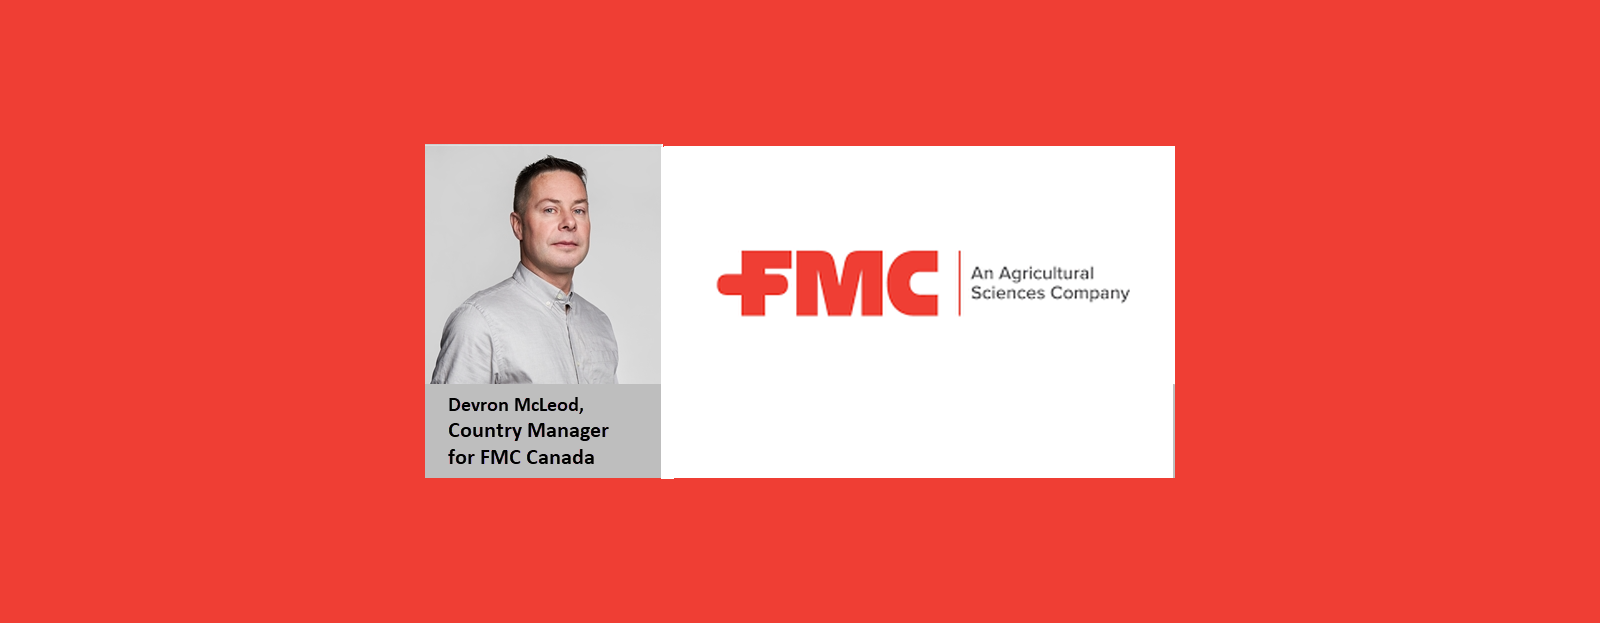 FMC Canada Announces New Country Manager